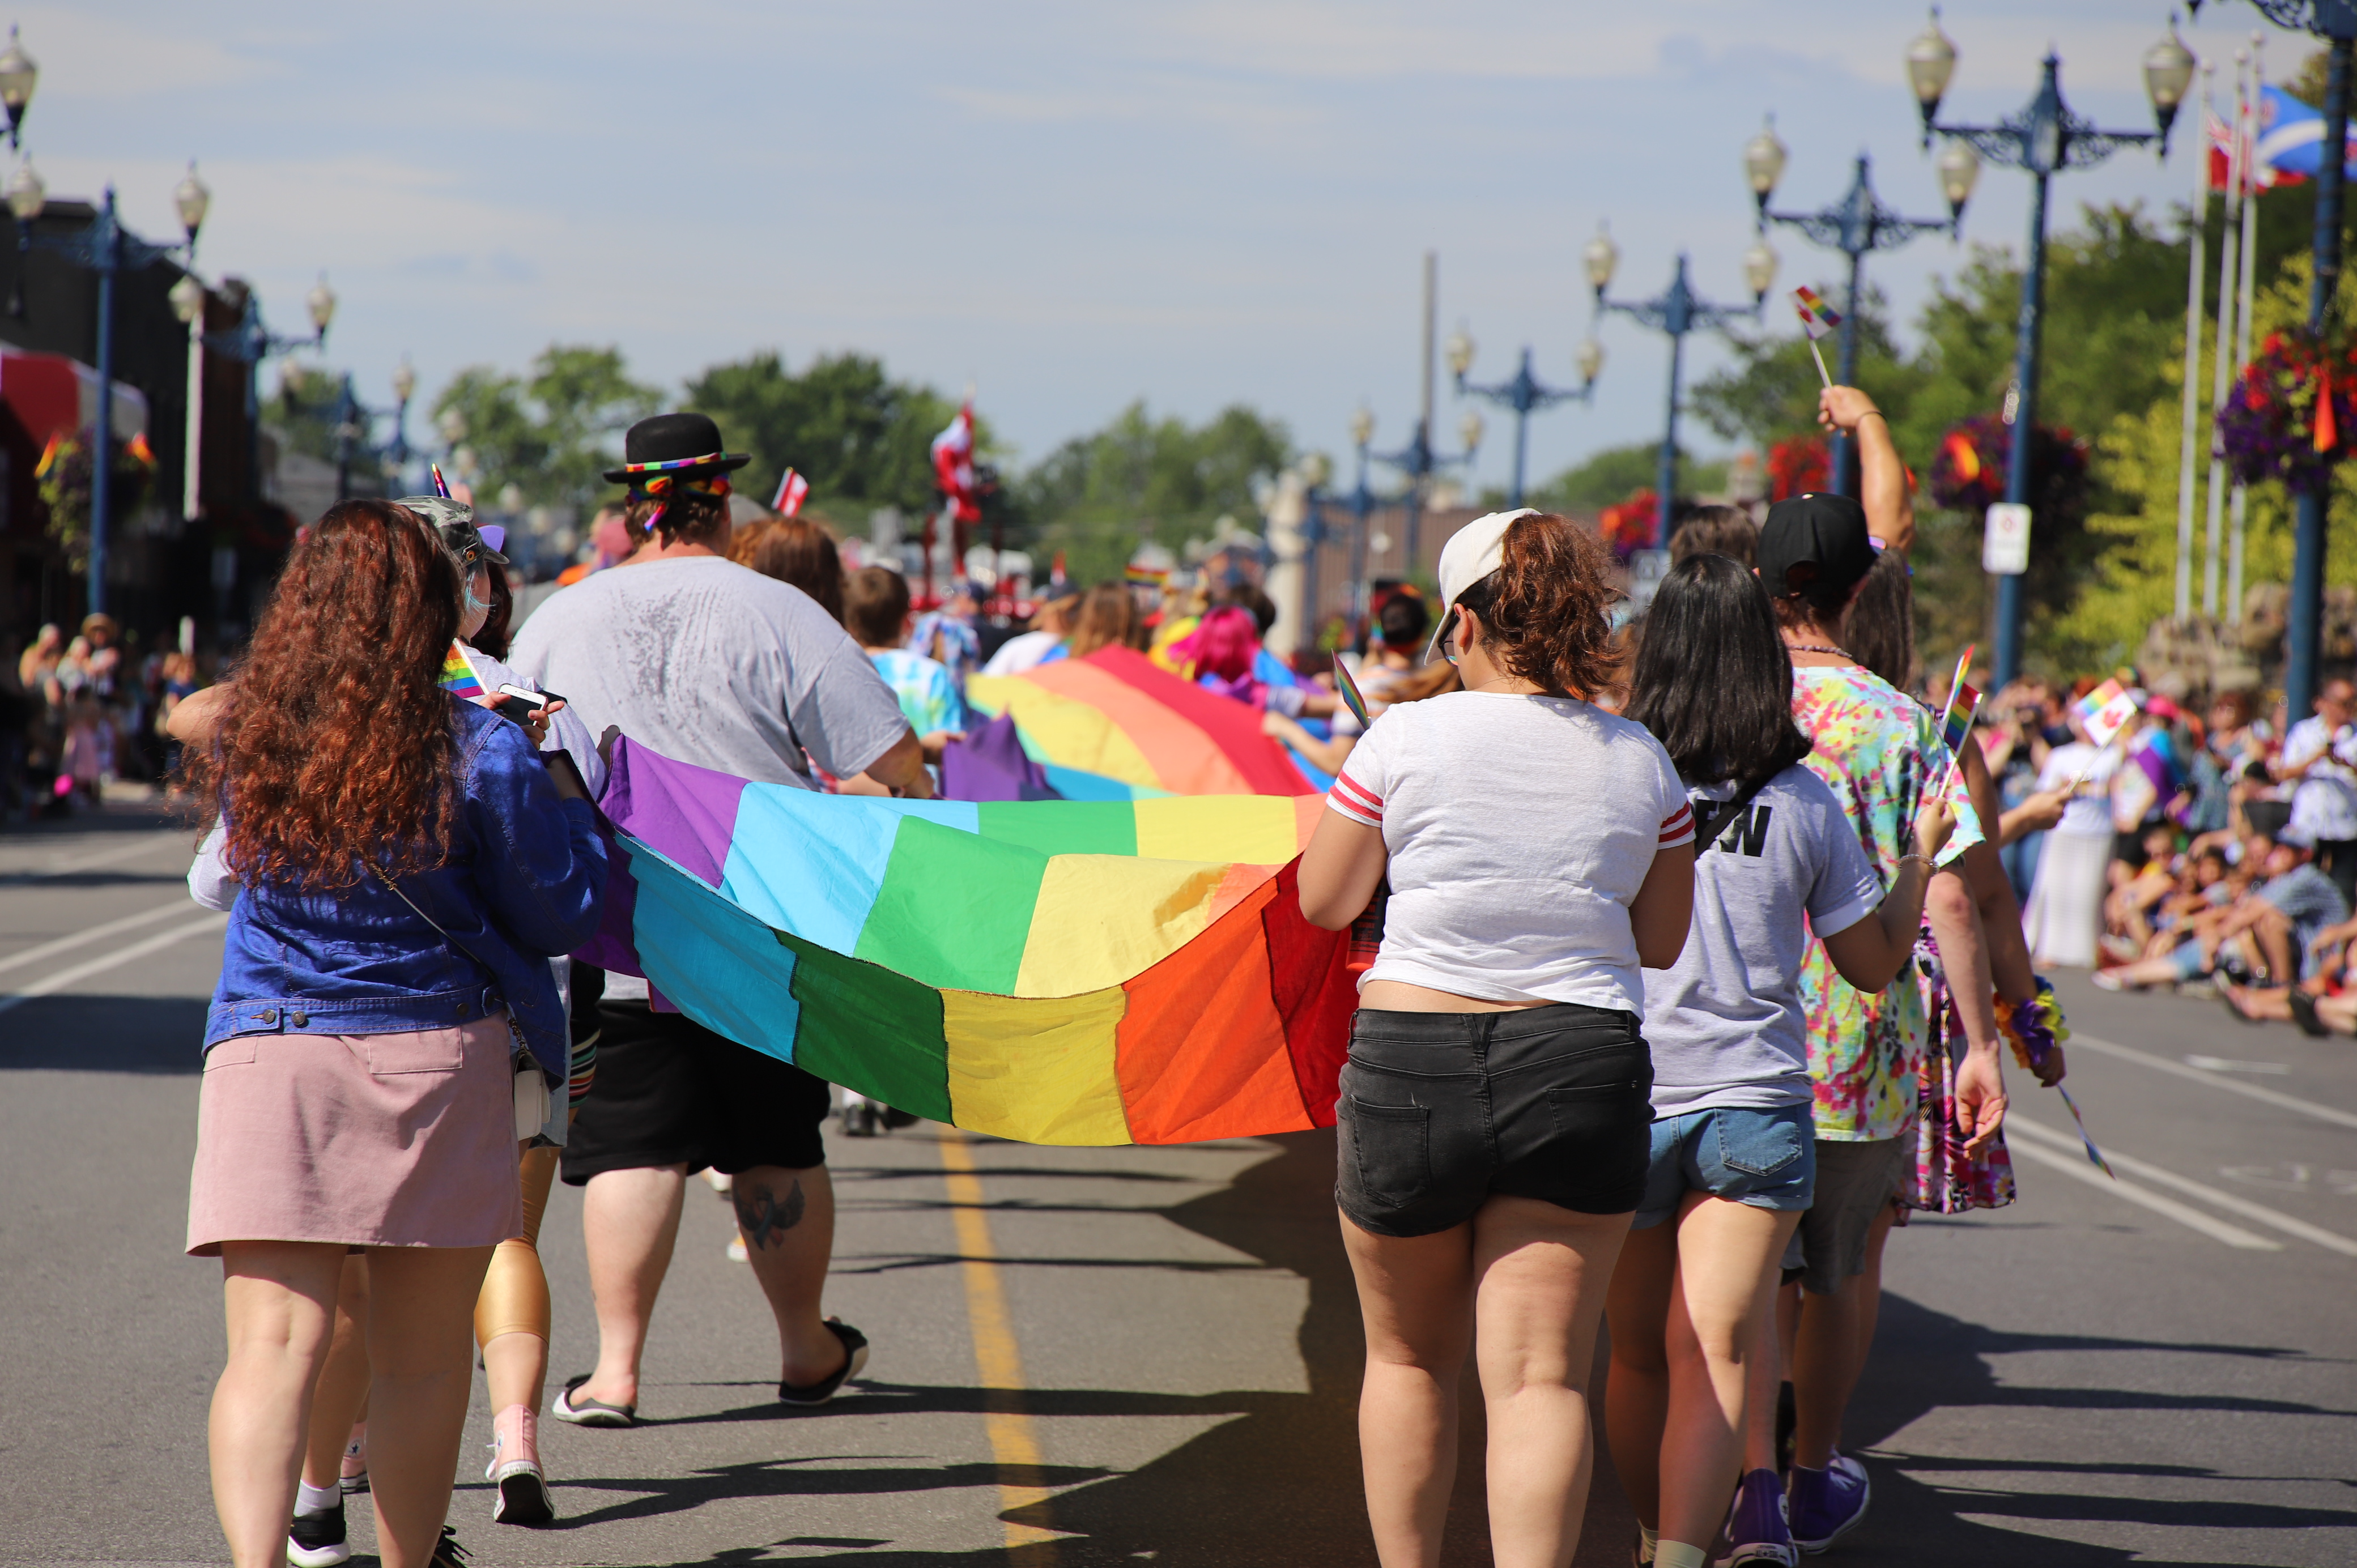 PHOTOS Ottawa Filled With Cheer For 27th Annual Pride Parade